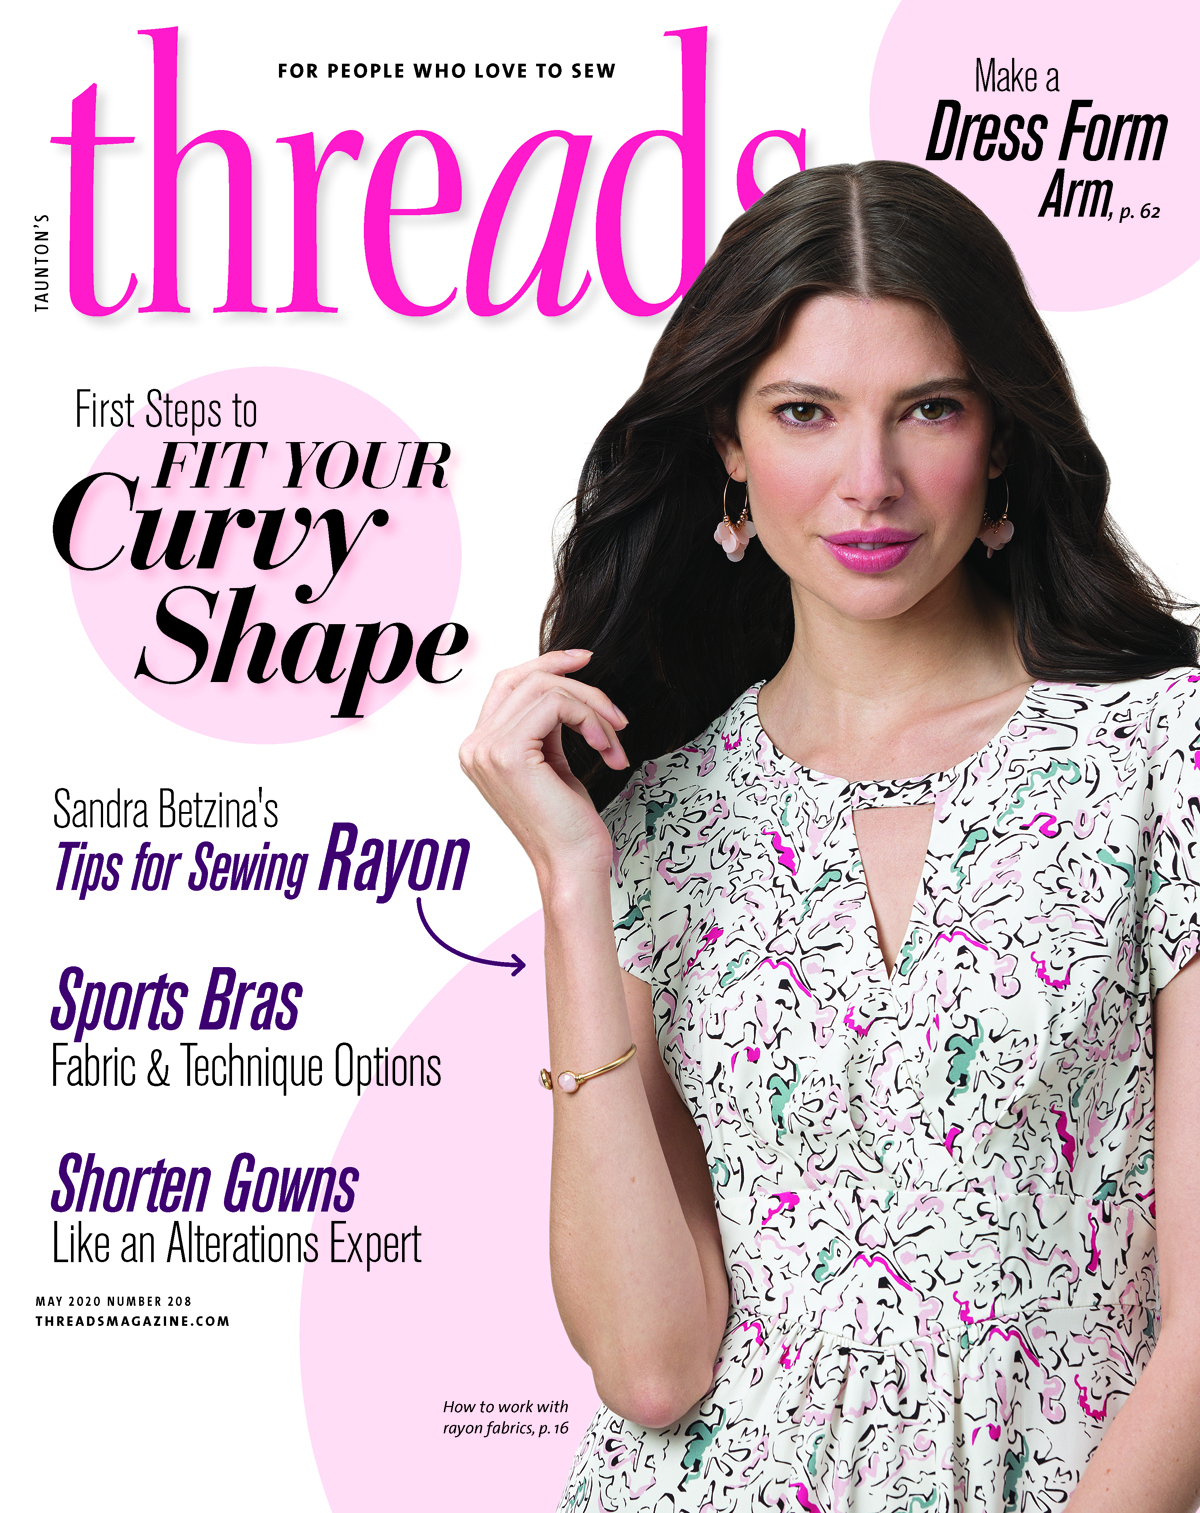 Threads magazine 208 front cover